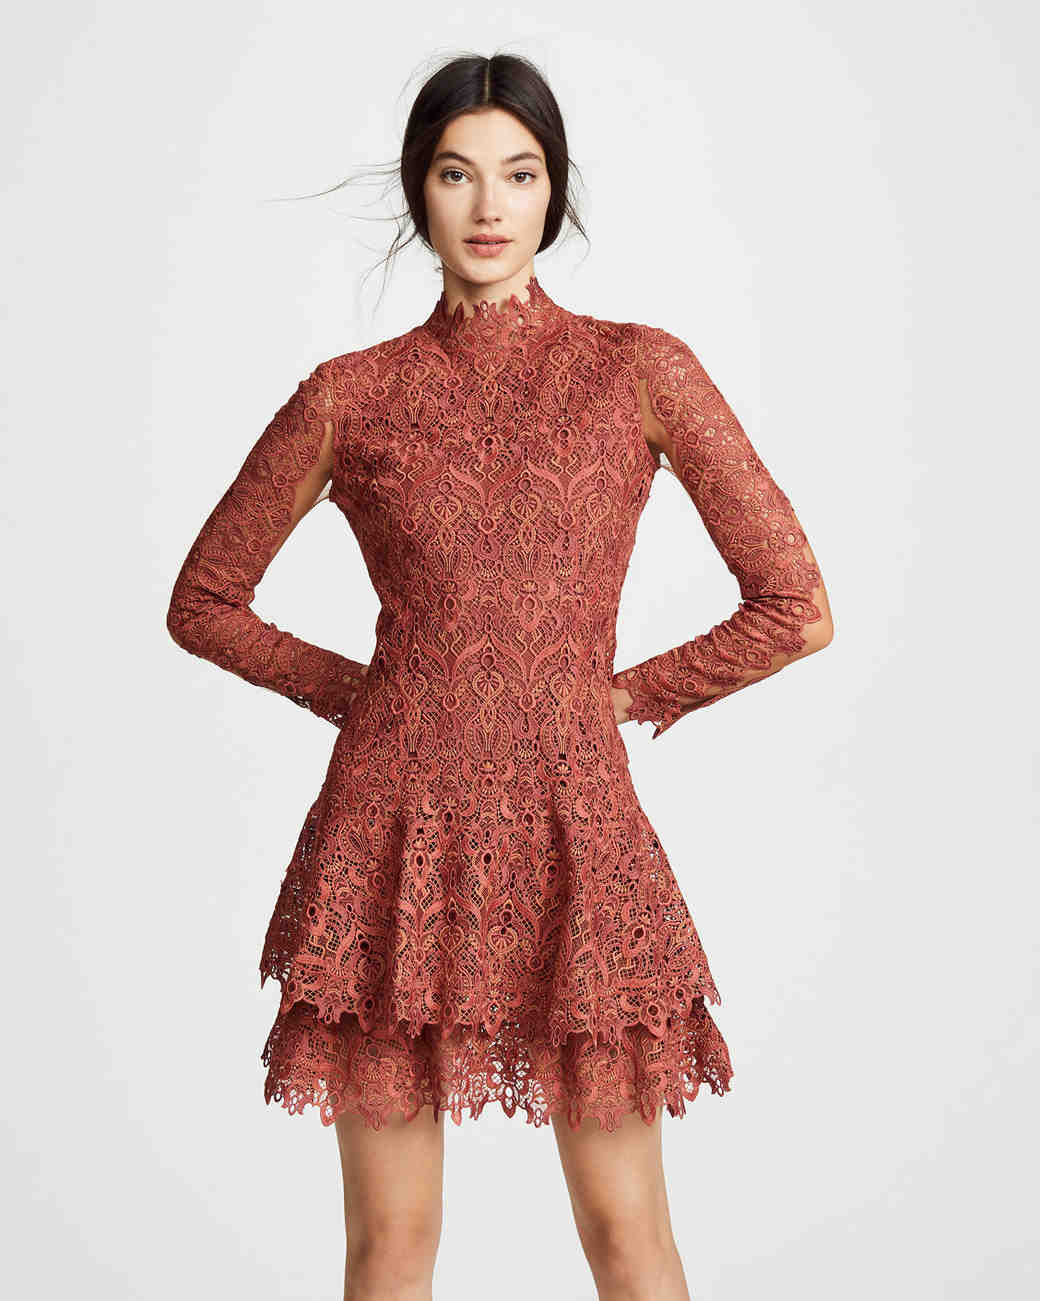 Fall Wedding Guest Dresses
 Beautiful Dresses to Wear as a Wedding Guest This Fall